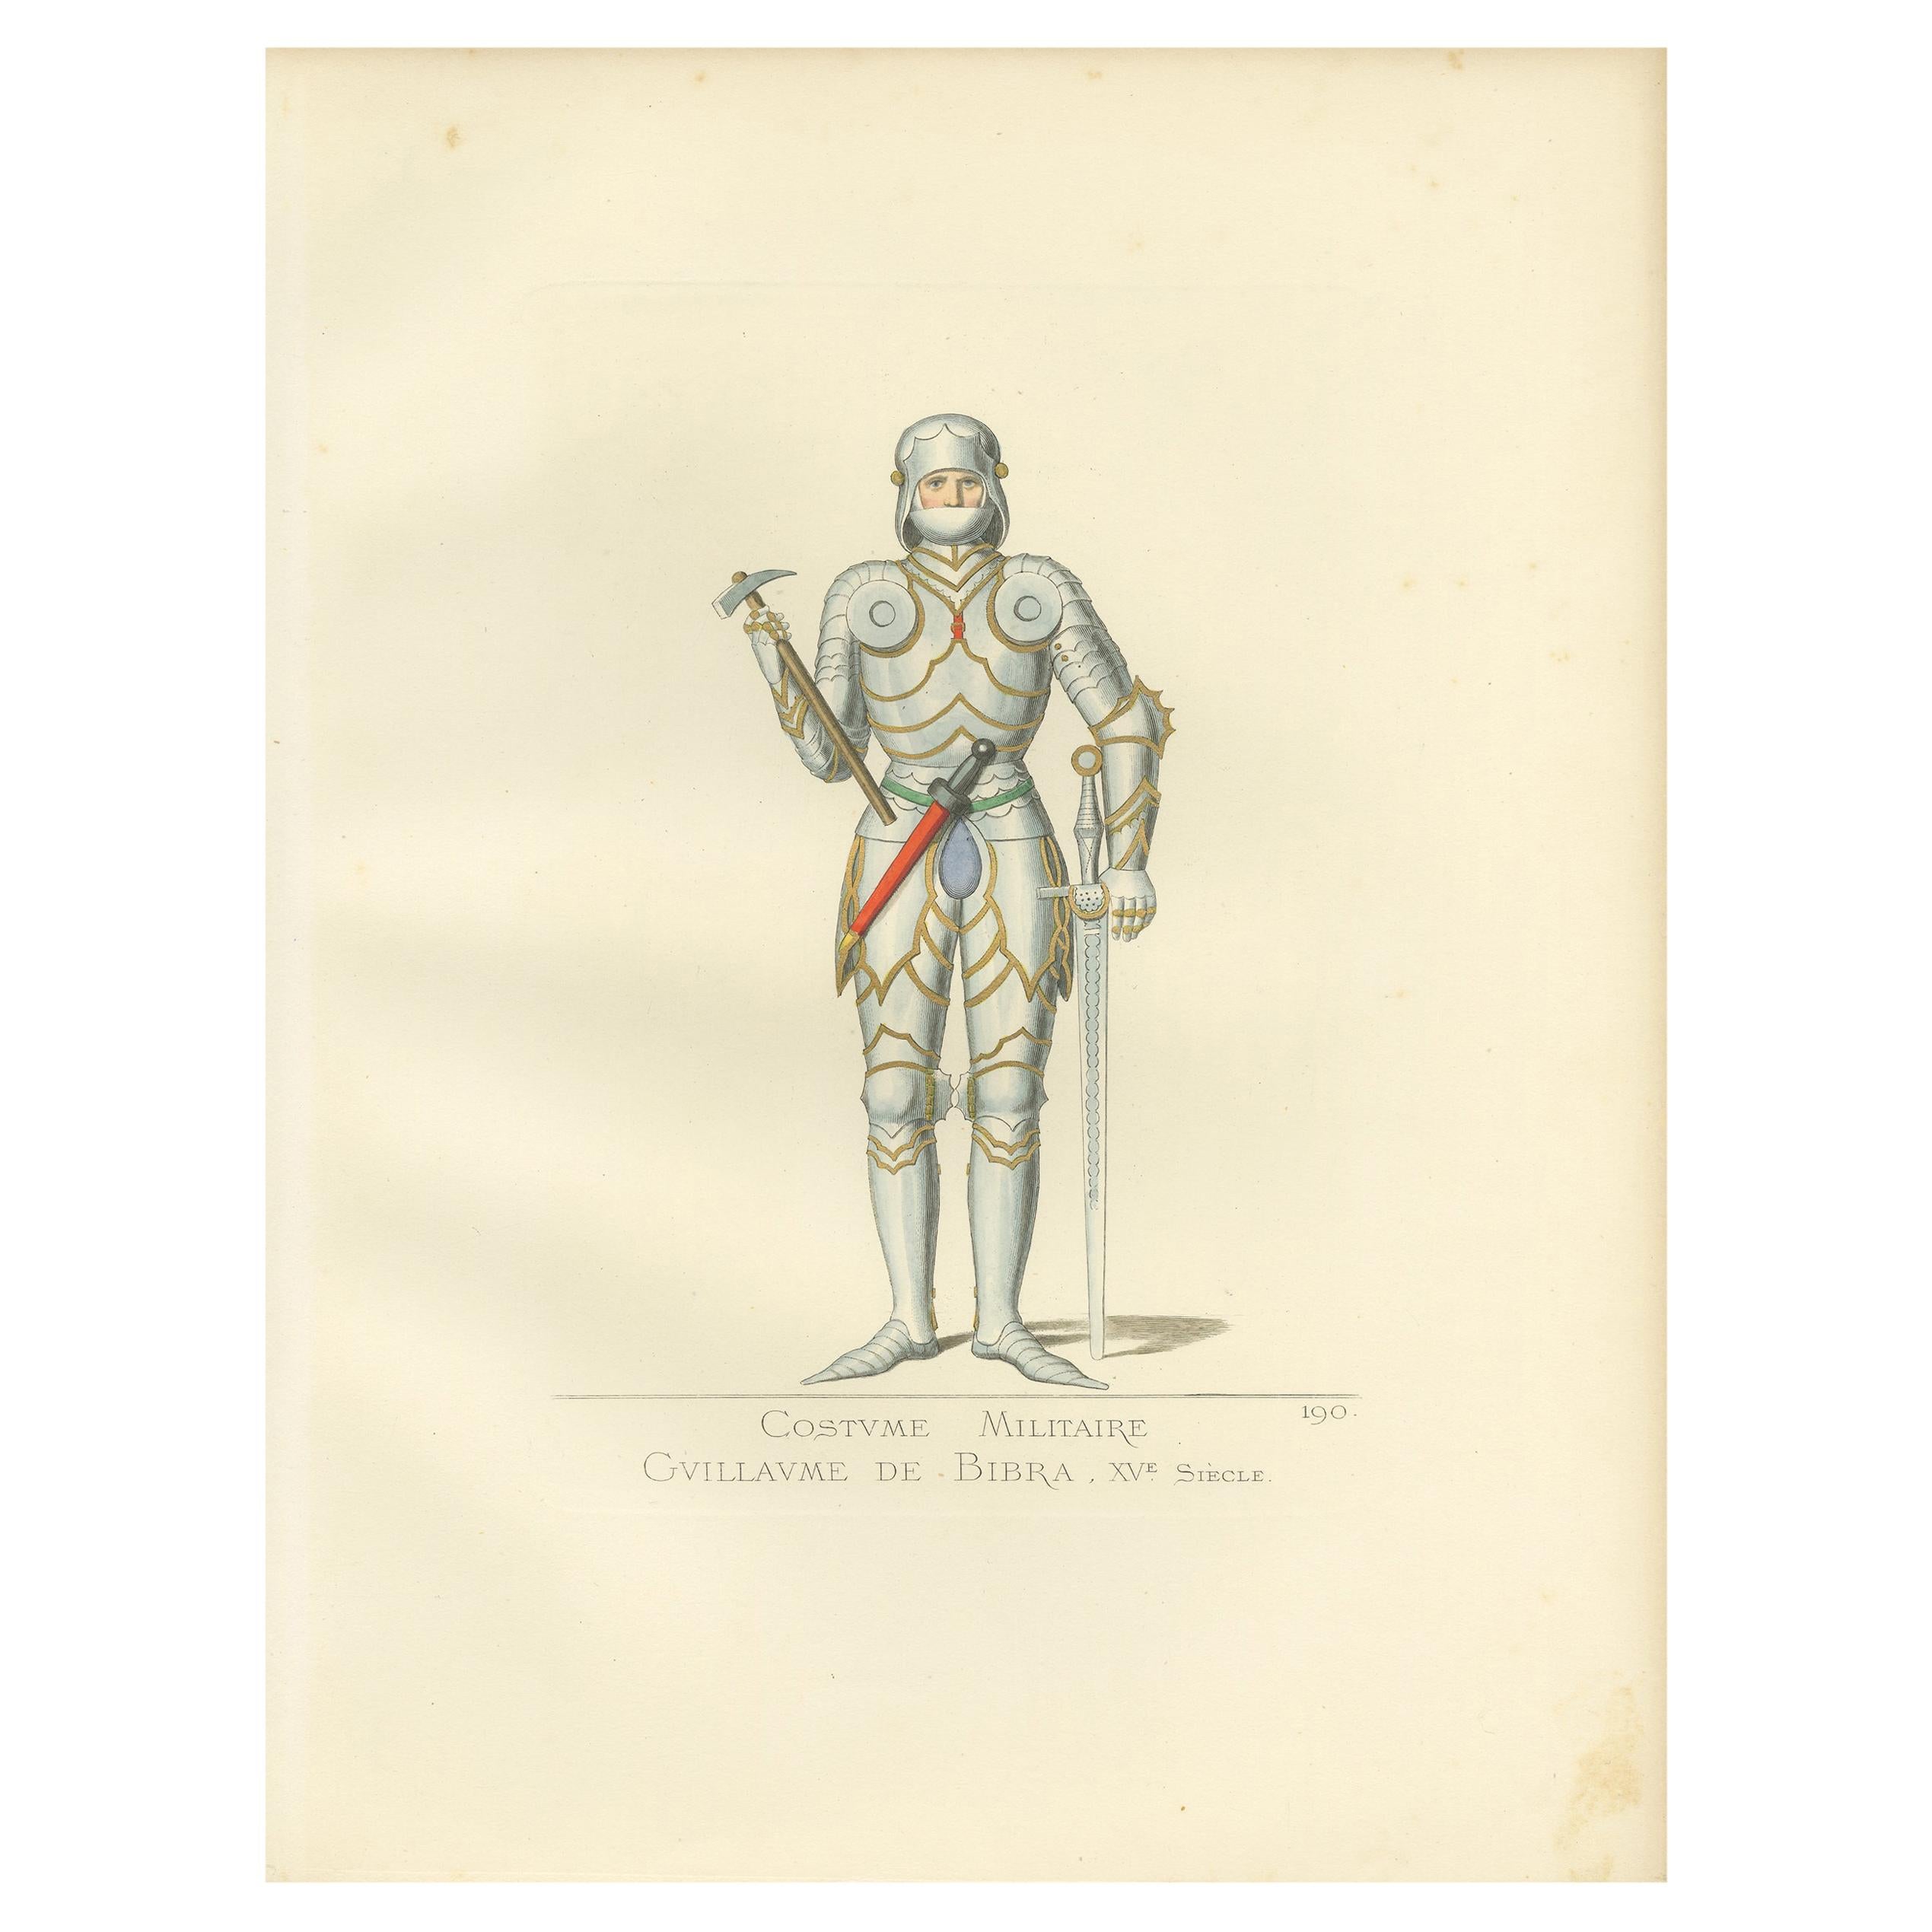 Antique Print of Guillaume de Bibra in Military Costume by Bonnard, 1860